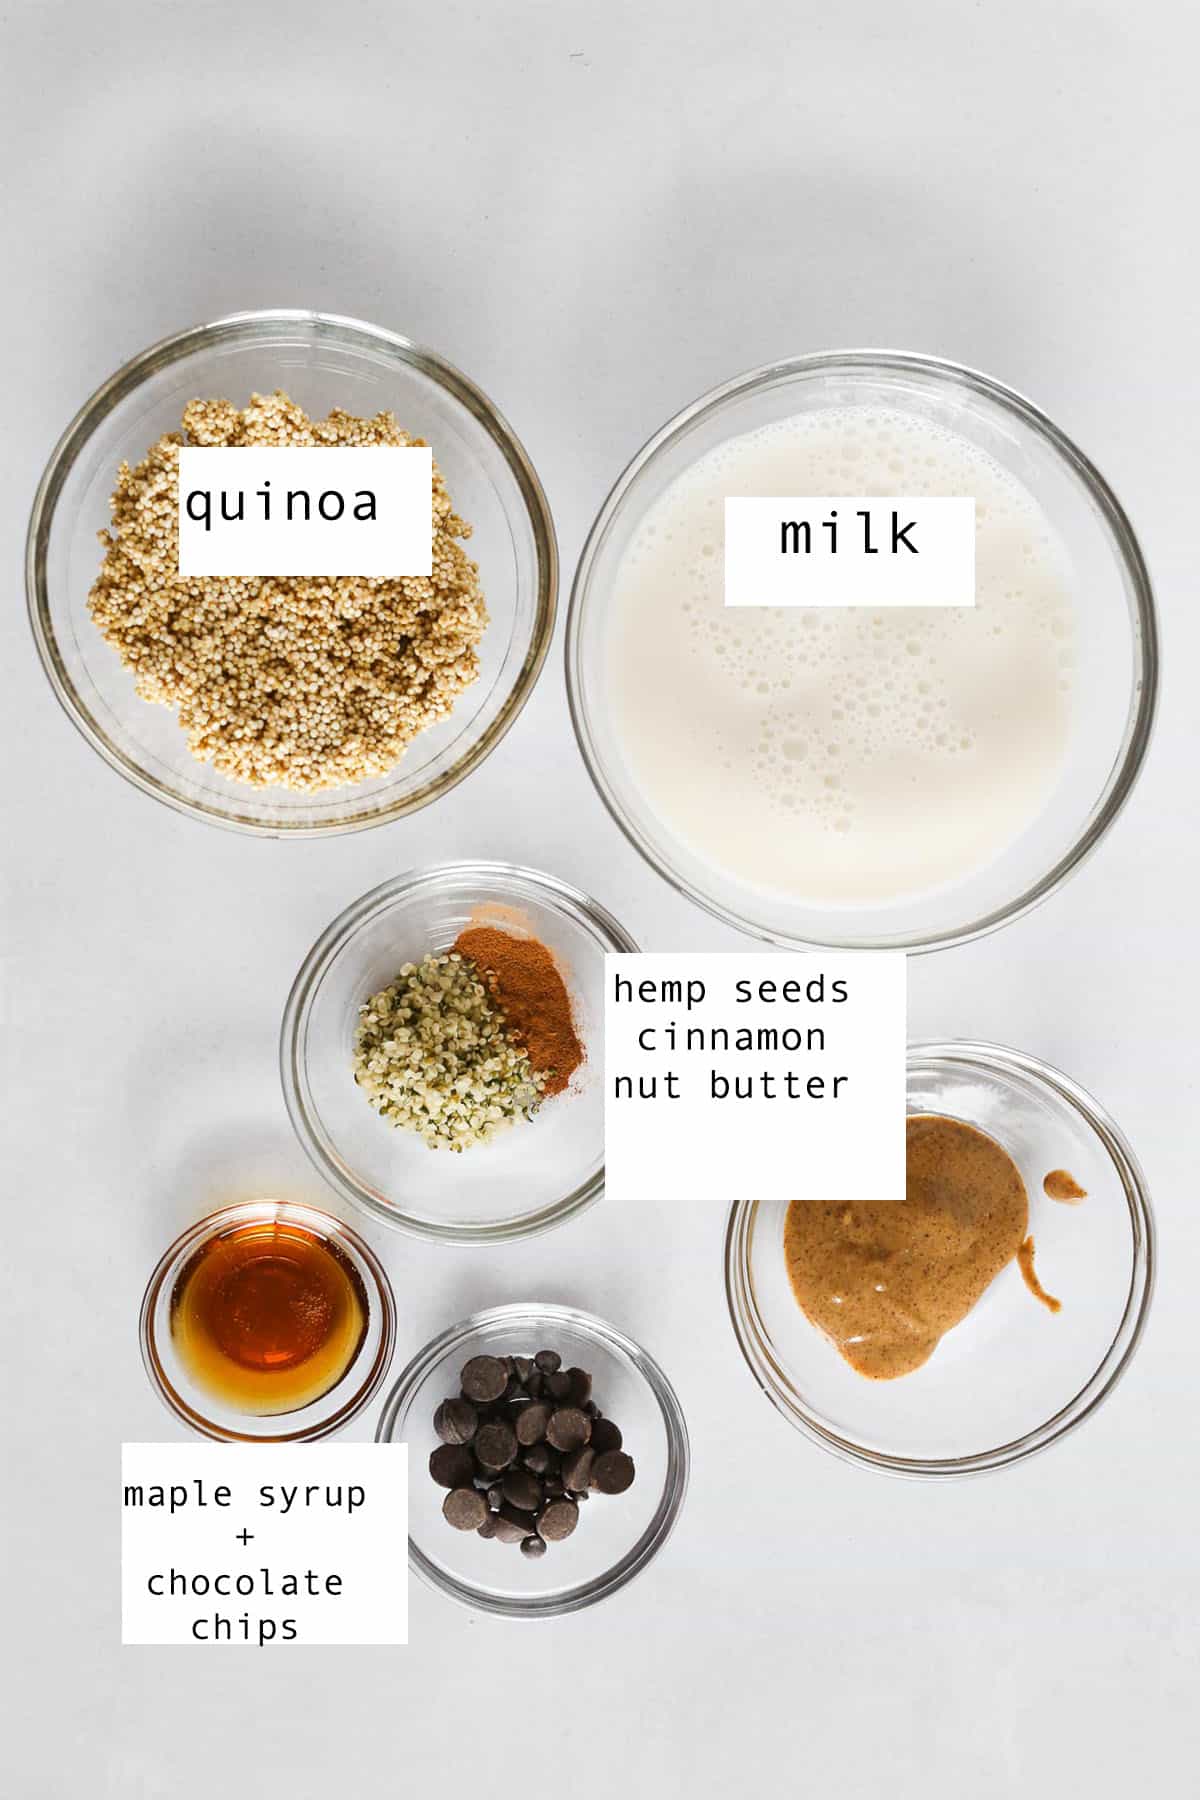 Ingredients to make a quinoa bowl for breakfast on the counter with text labels before mixing.